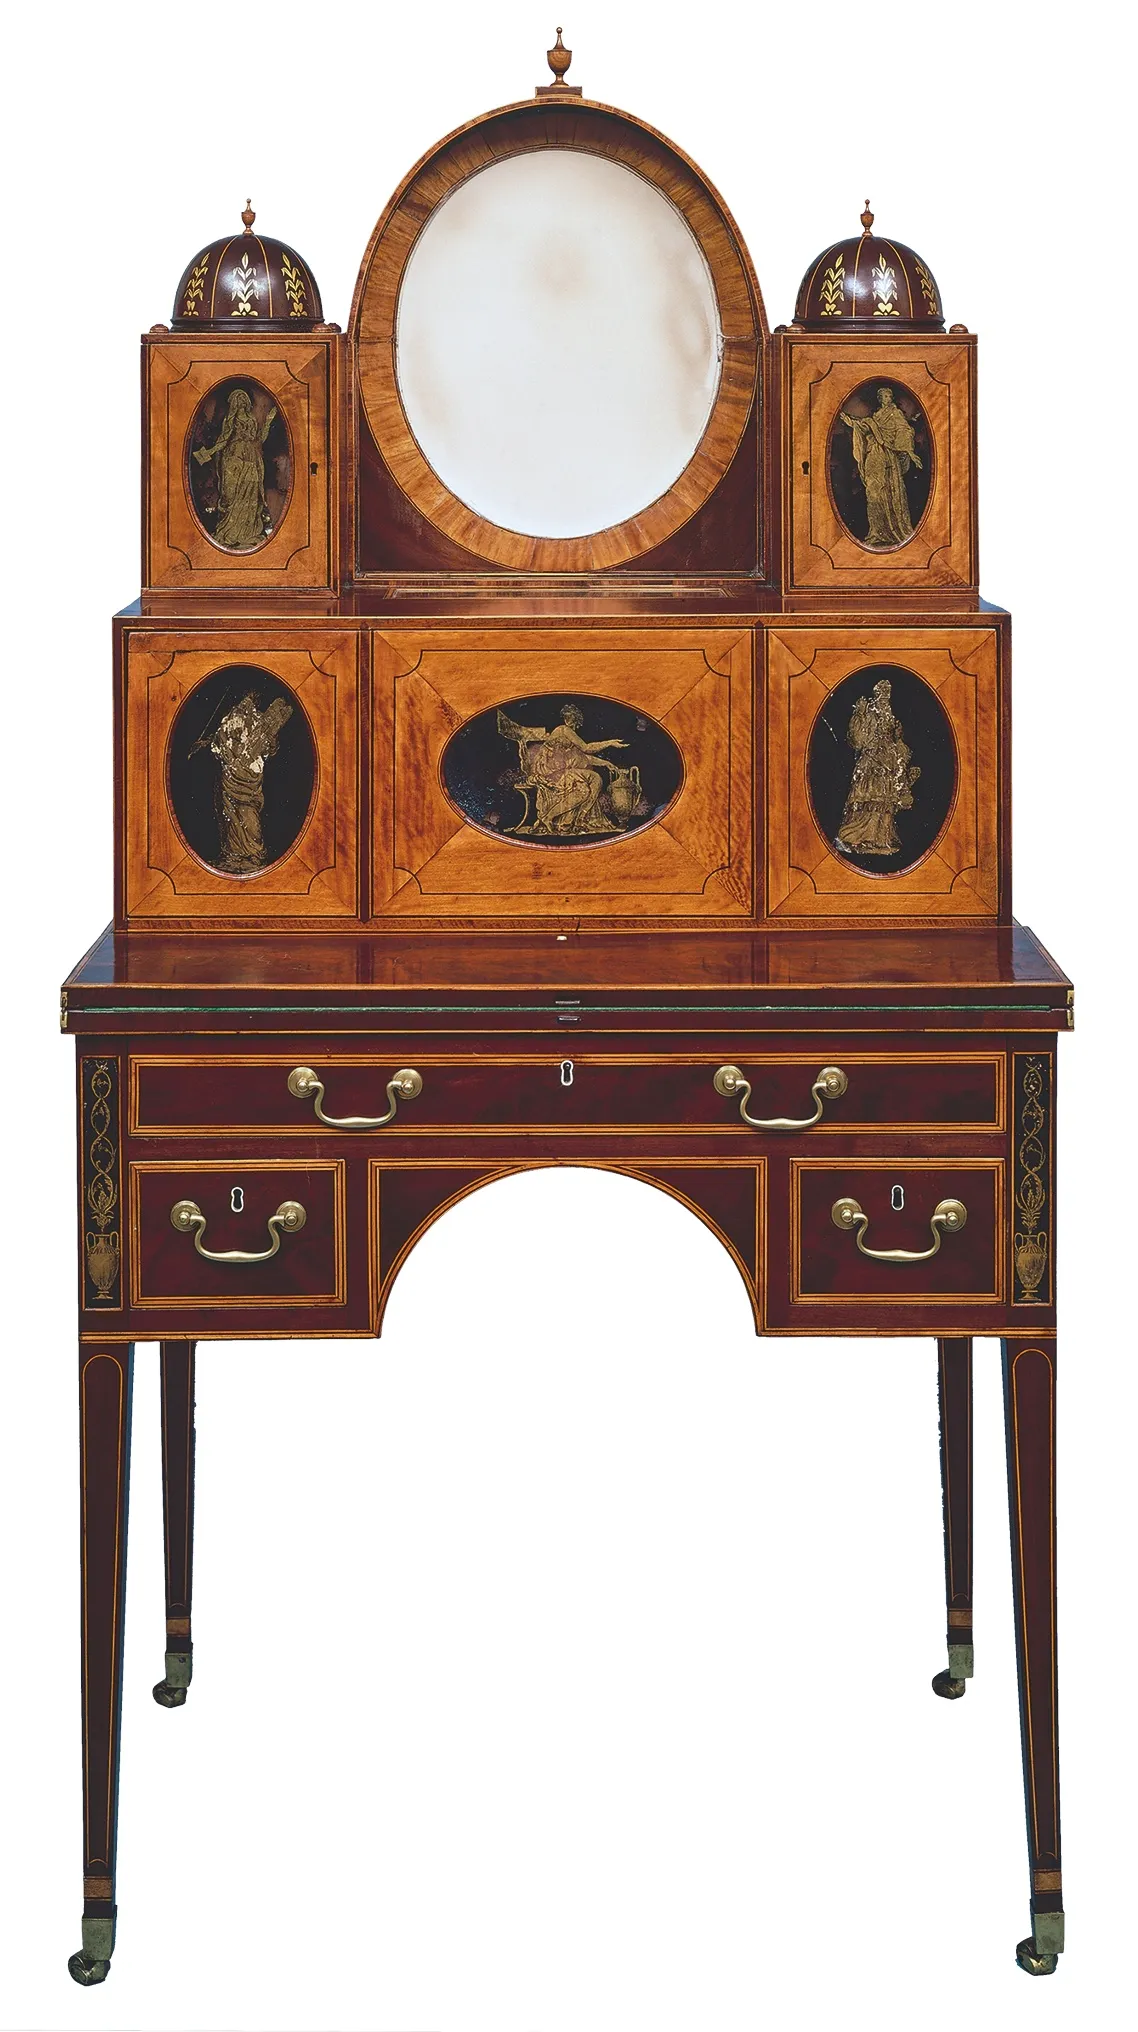 This writing desk with lift top from a design by Thomas Sheraton c1795-1810 at Winterthur Museum, Garden & Library in Delaware in the US.